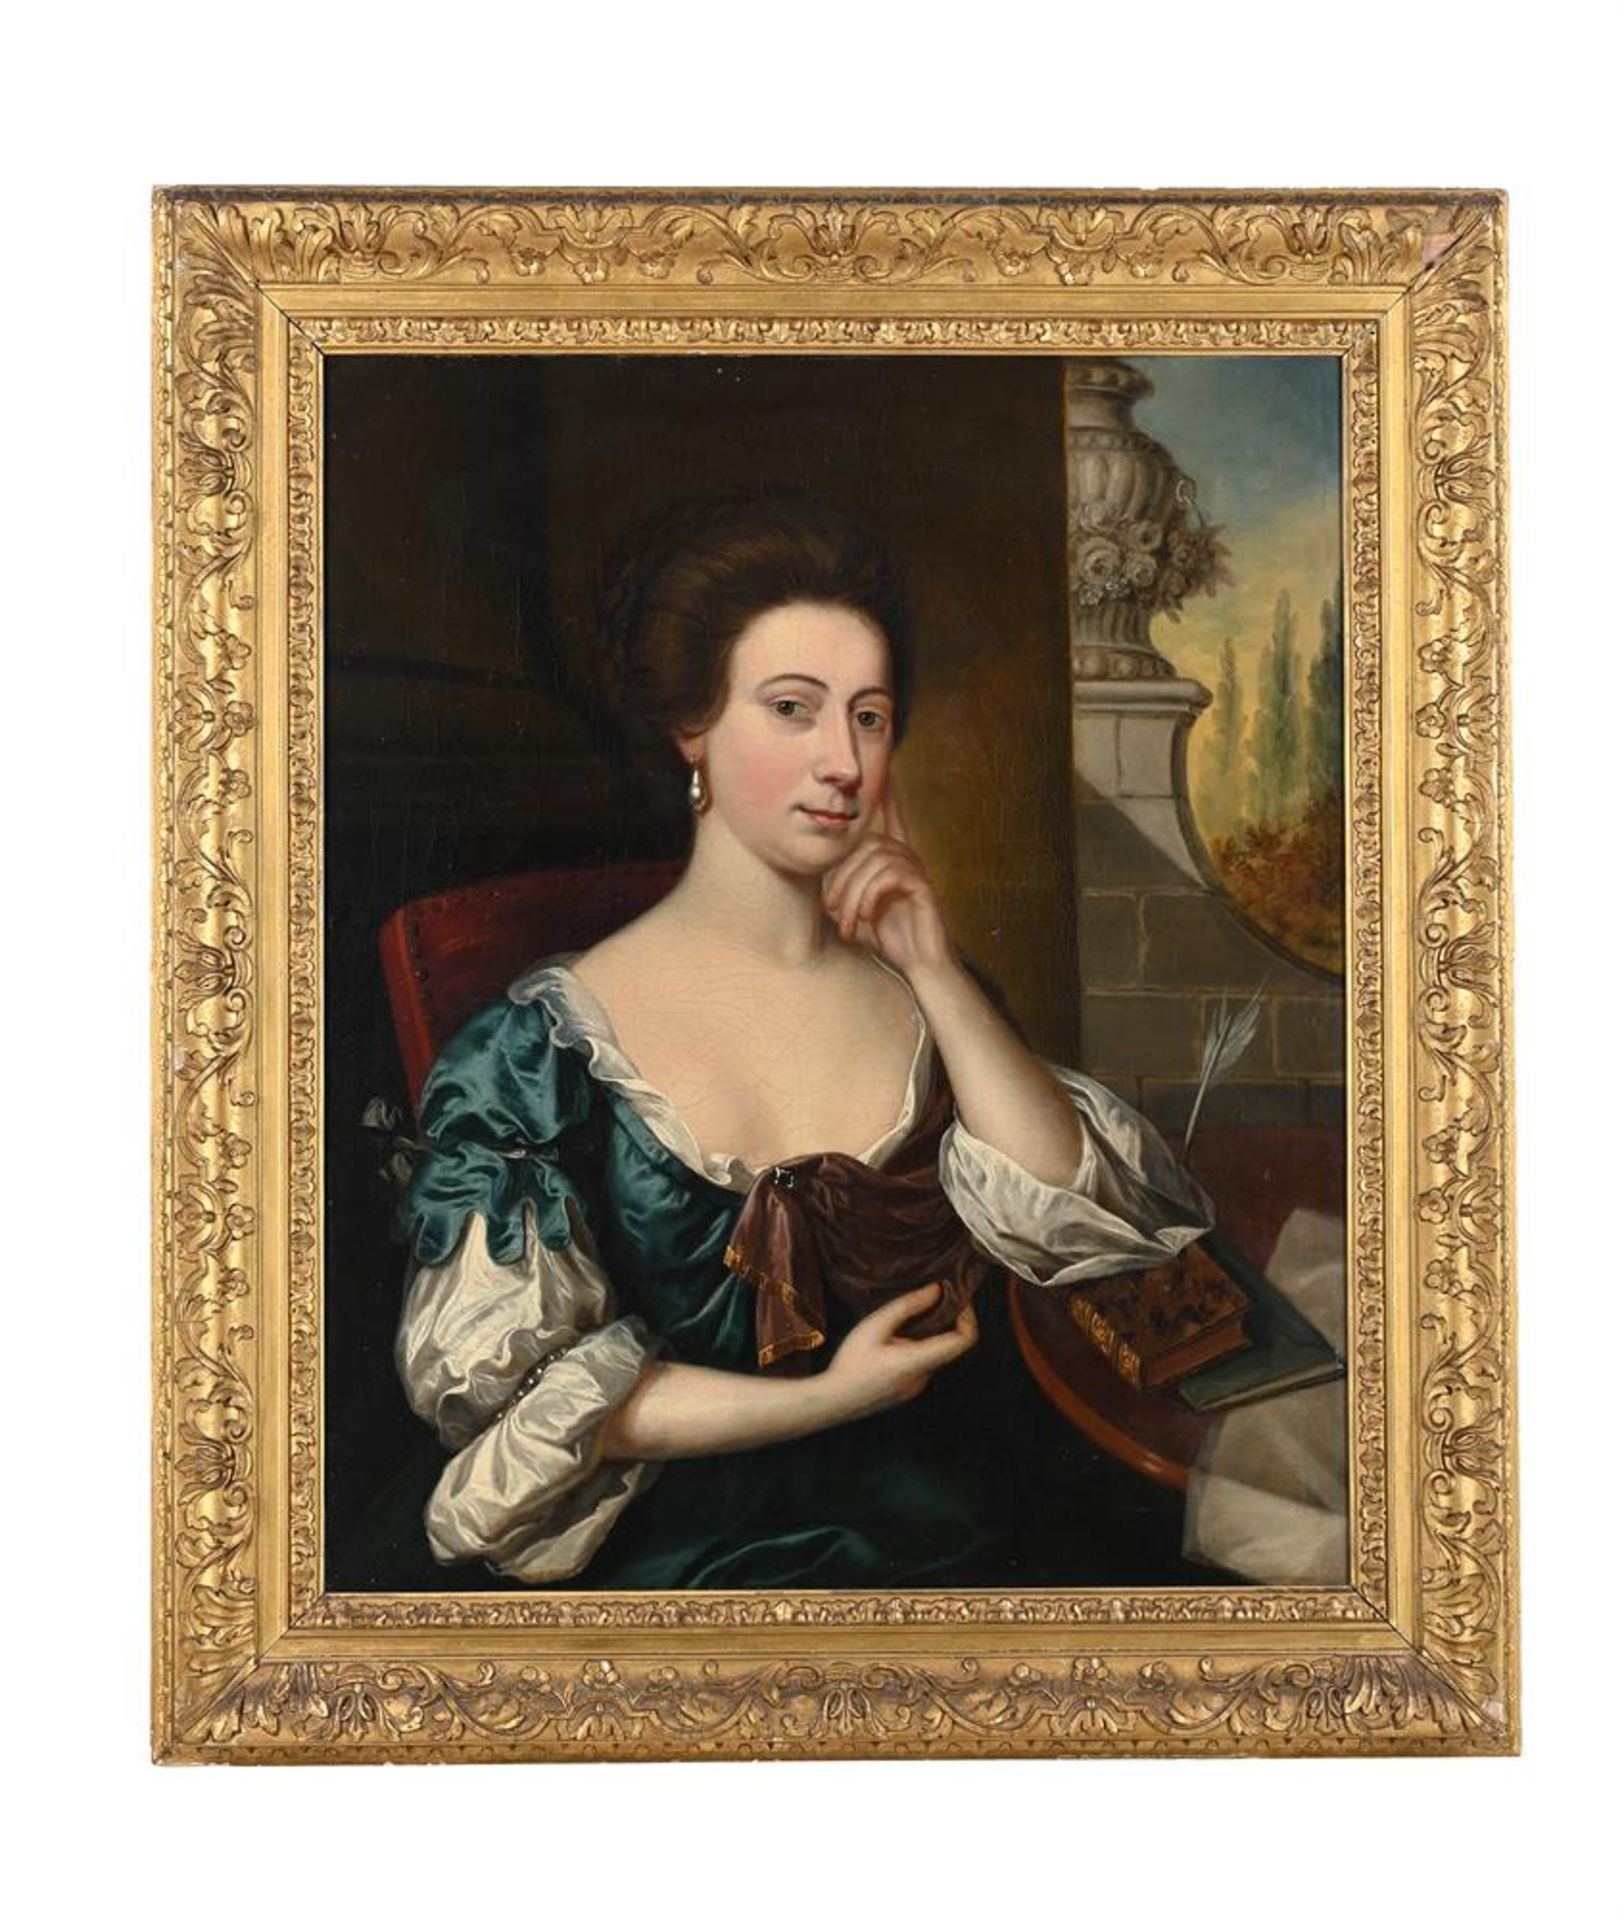 FOLLOWER OF SIR PETER LELY, PORTRAIT OF A WOMAN SEATED WITH A BOOK AND QUILL - Image 2 of 3